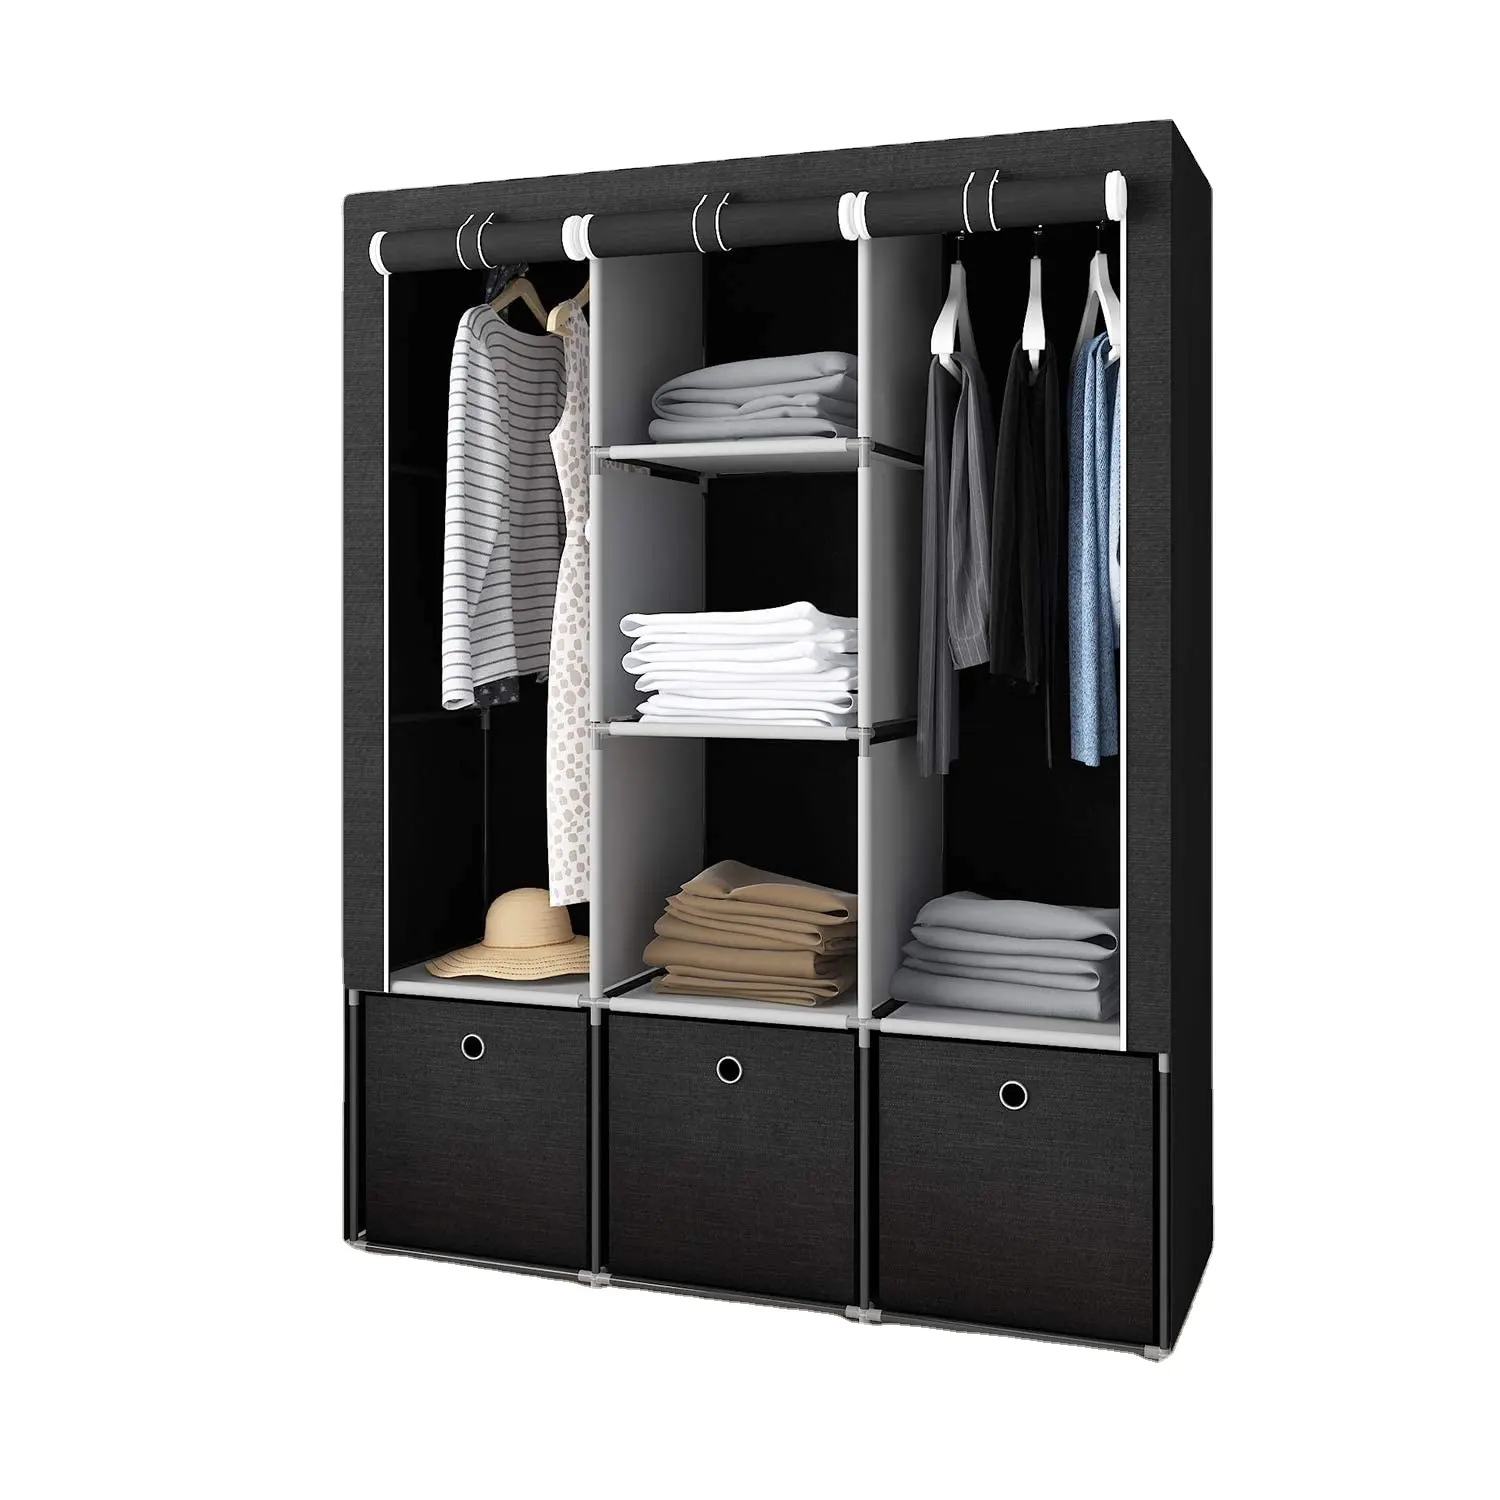 Fabric Wardrobe with 3 Drawers, Portable Clothes Closet Storage Organizer with Compartments and Rods